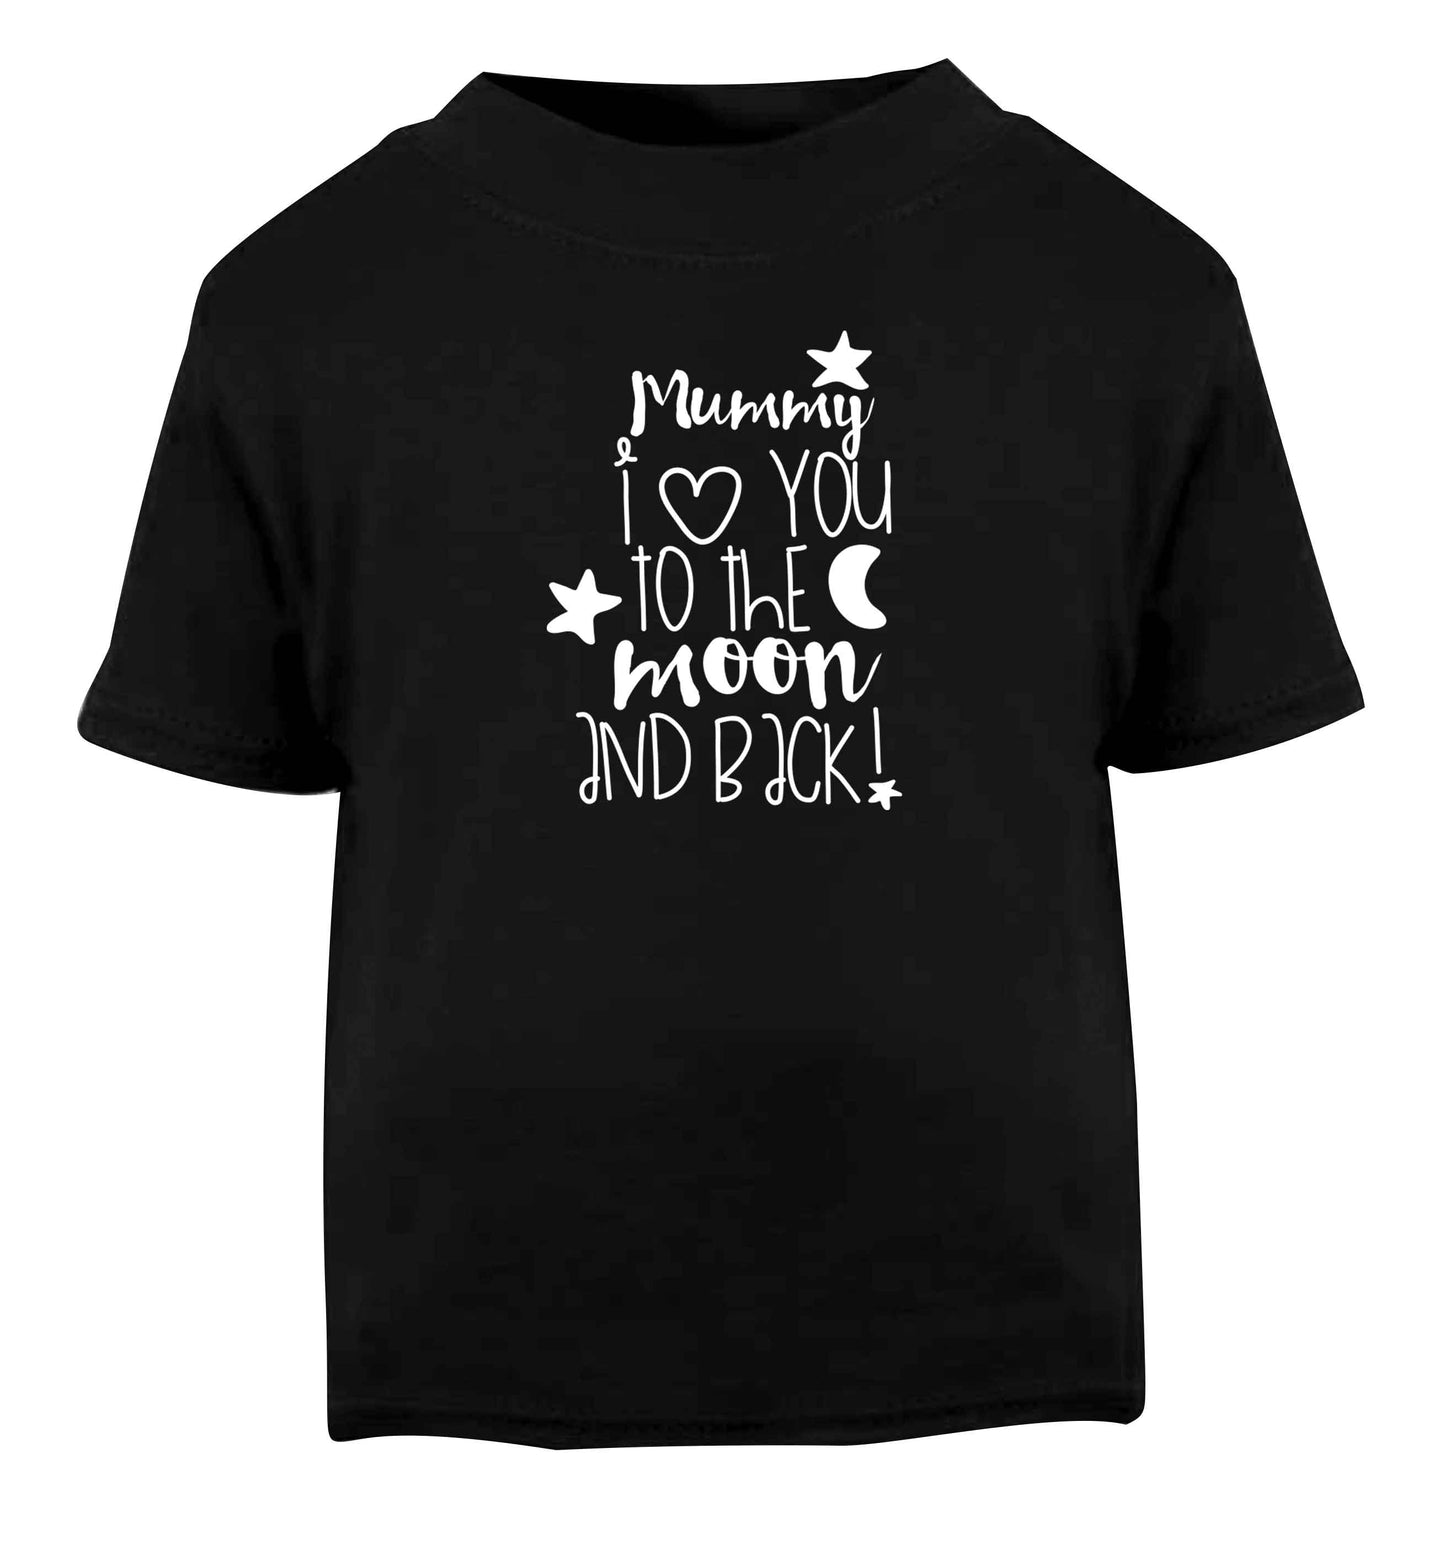 Mummy I love you to the moon and back Black baby toddler Tshirt 2 years